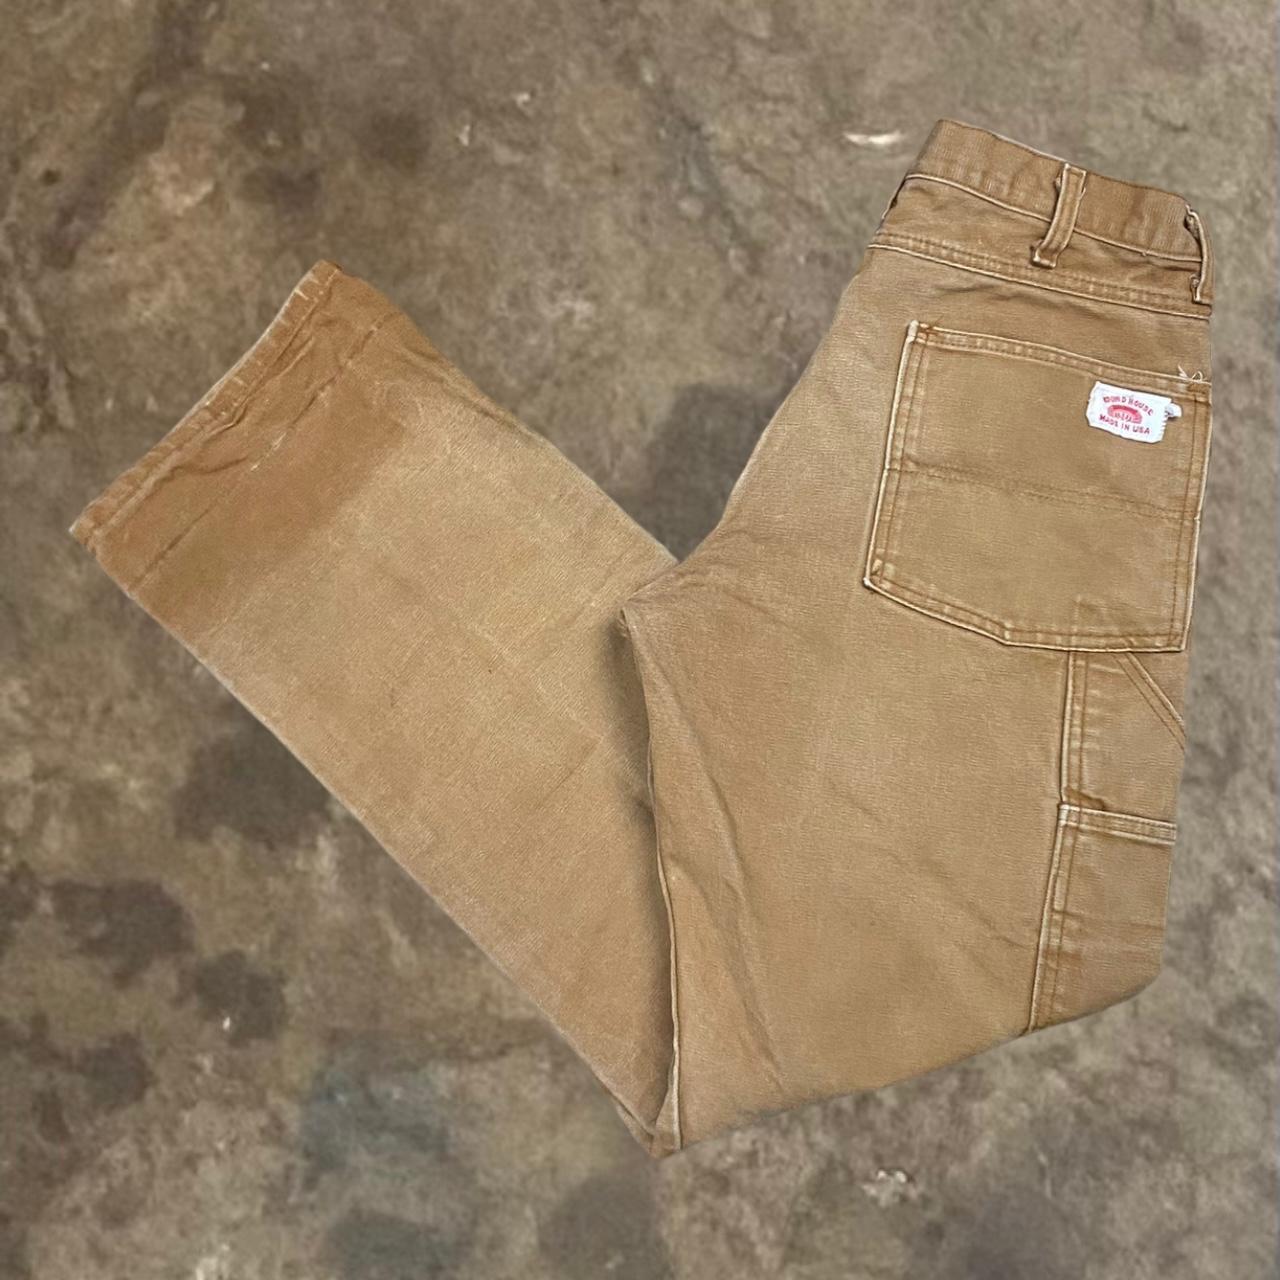 Vintage Carhartt Double Knee Pants Made in USA size 32x32